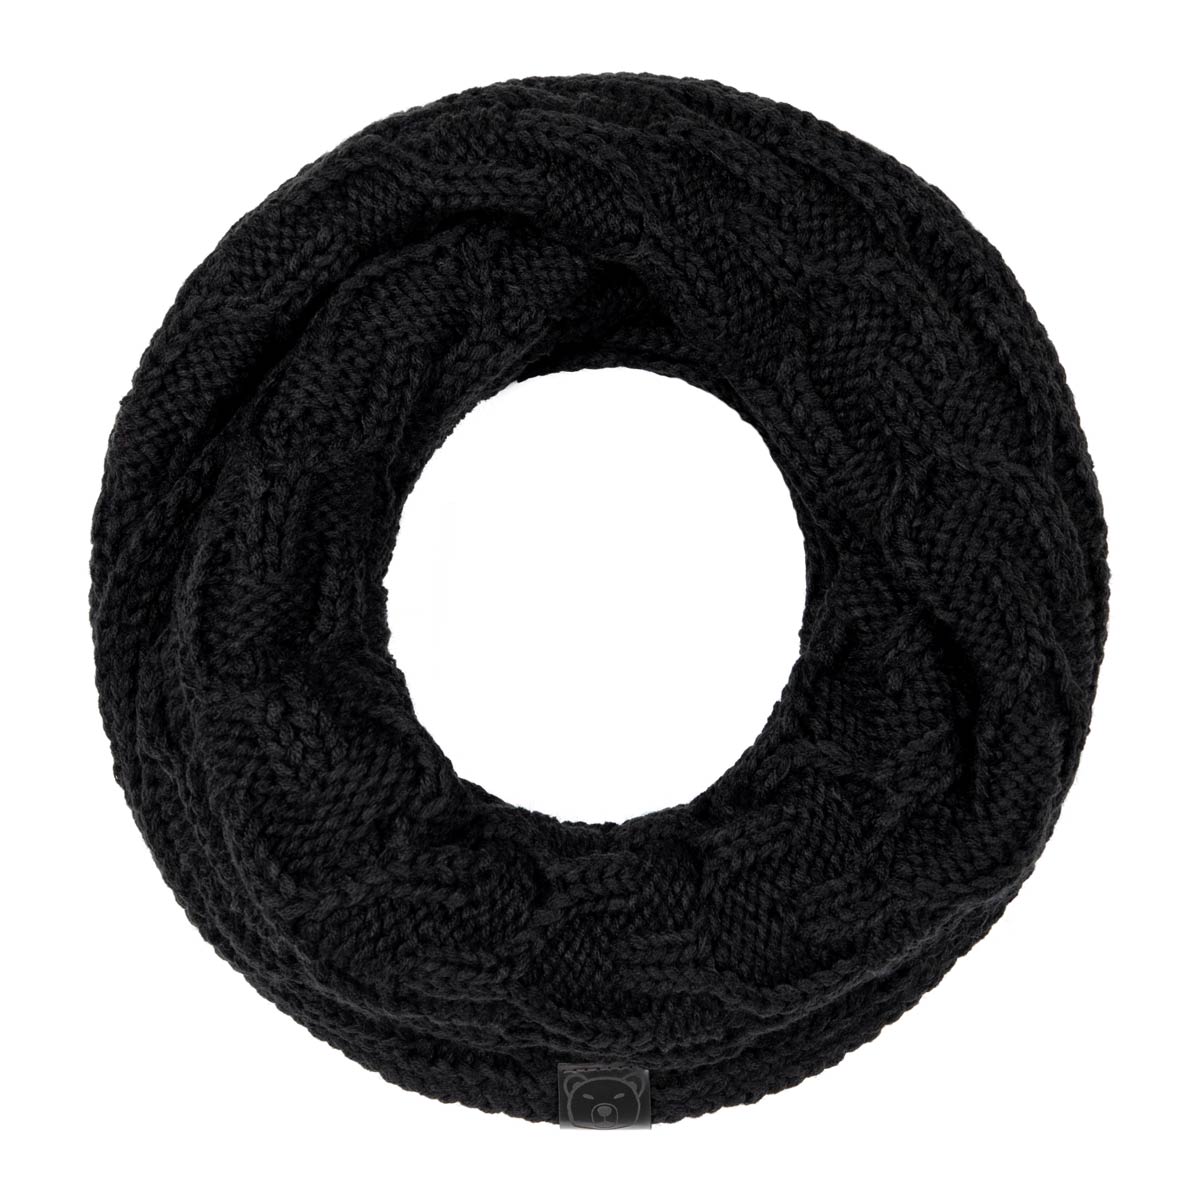 Snood-femme-hiver-noir-made-in-Europe--AT-07068_F12-1--